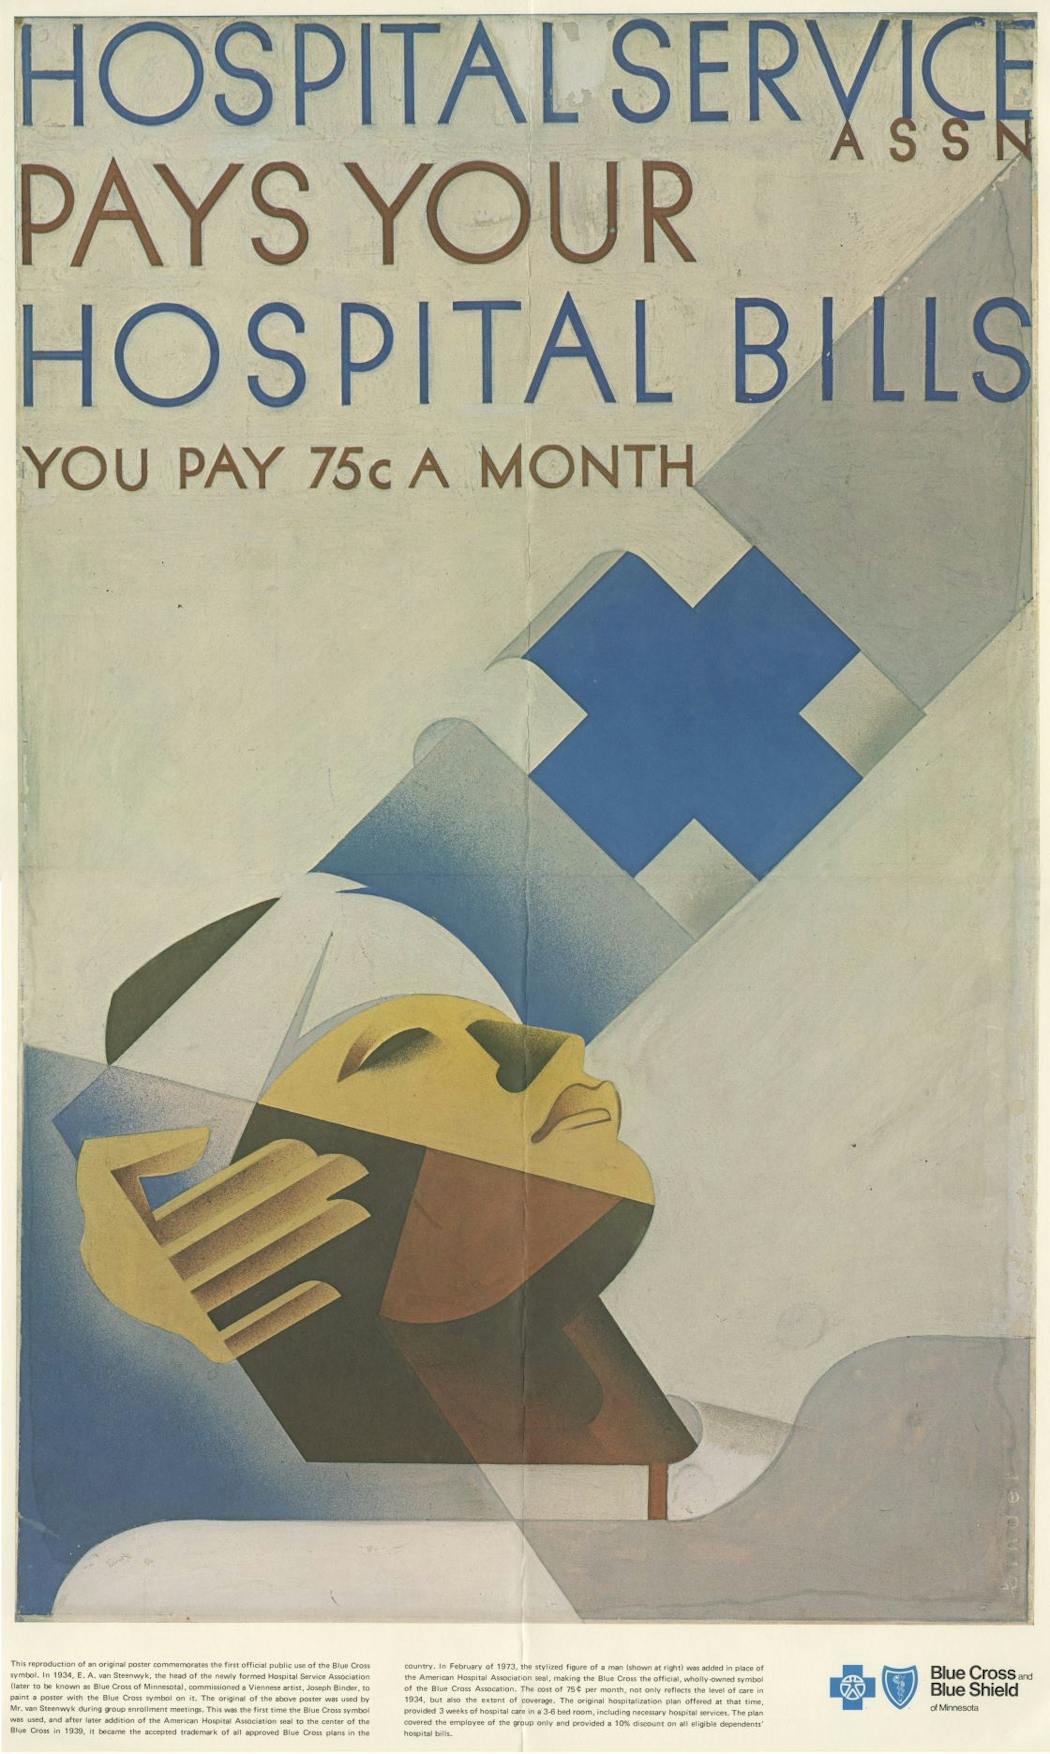 The 1934 poster was commissioned by the Hospital Service Association, the predecessor of Blue Cross of Minnesota that was incorporated in Ramsey County on Feb. 4, 1933. The original poster is on display at headquarters of the Blue Cross and Blue Shield Association in Chicago.